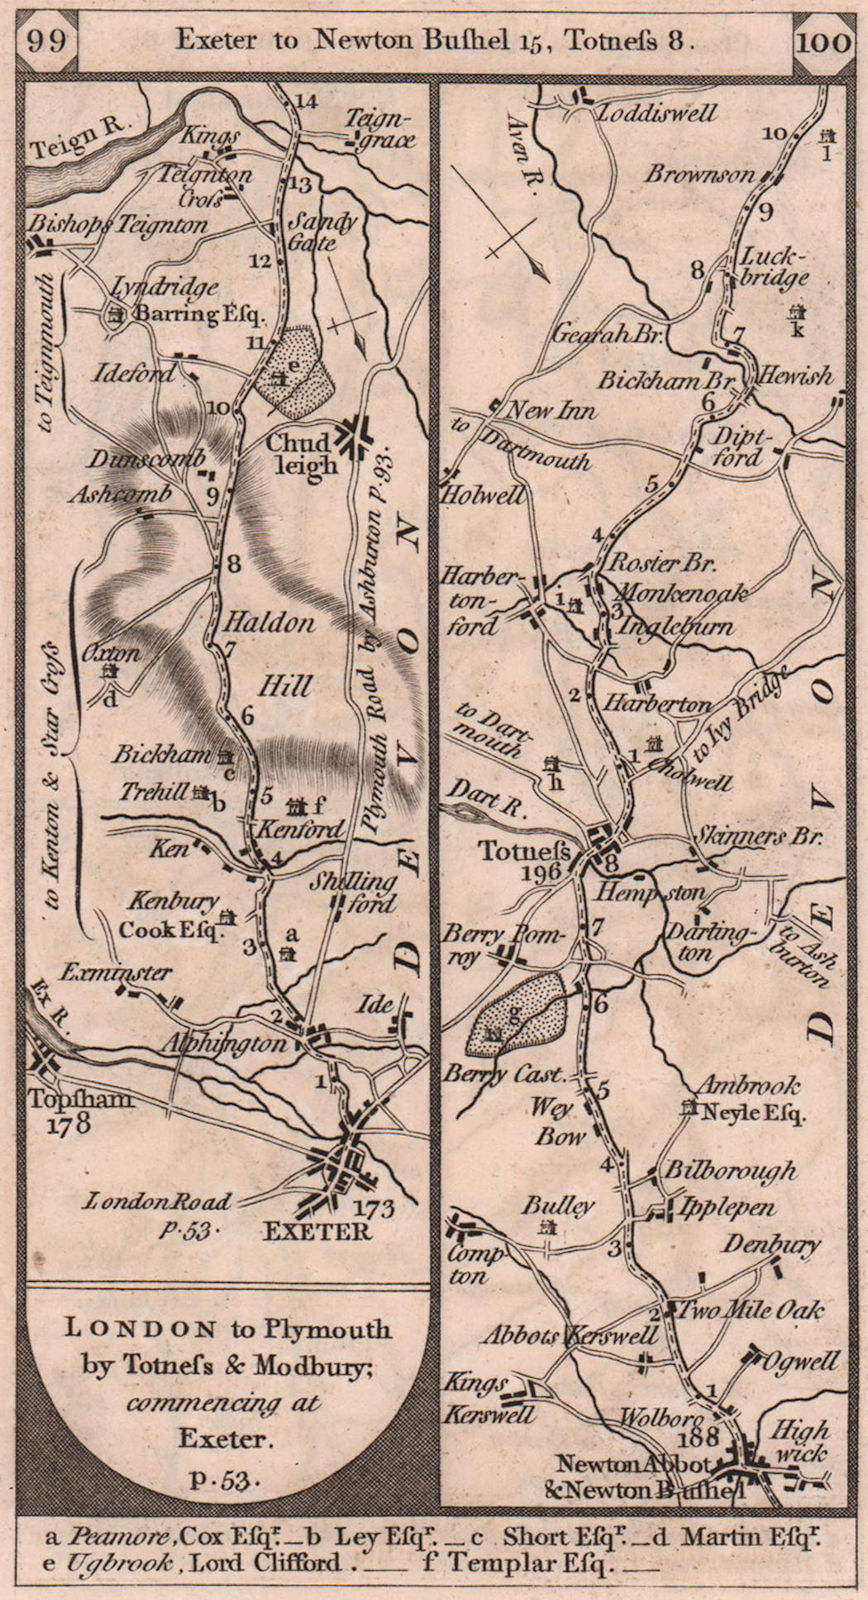 Exeter-Chudleigh-Newton Abbot-Totnes-Brownston road strip map PATERSON 1803